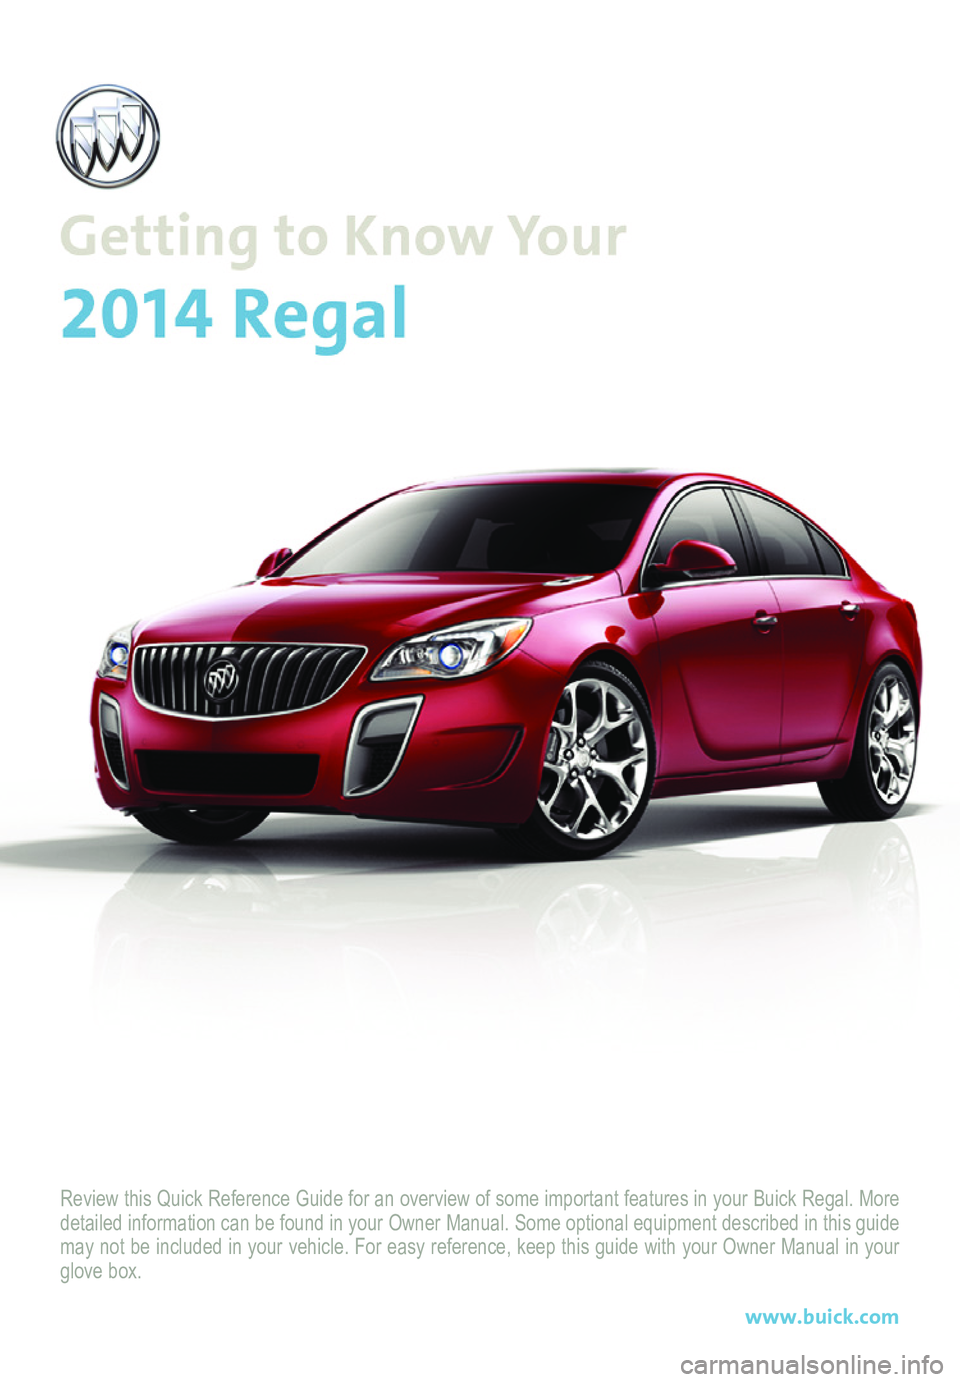 BUICK REGAL 2014  Get To Know Guide Review this Quick Reference Guide for an overview of some important feat\
ures in your Buick Regal. More detailed information can be found in your Owner Manual. Some optional eq\
uipment described in 